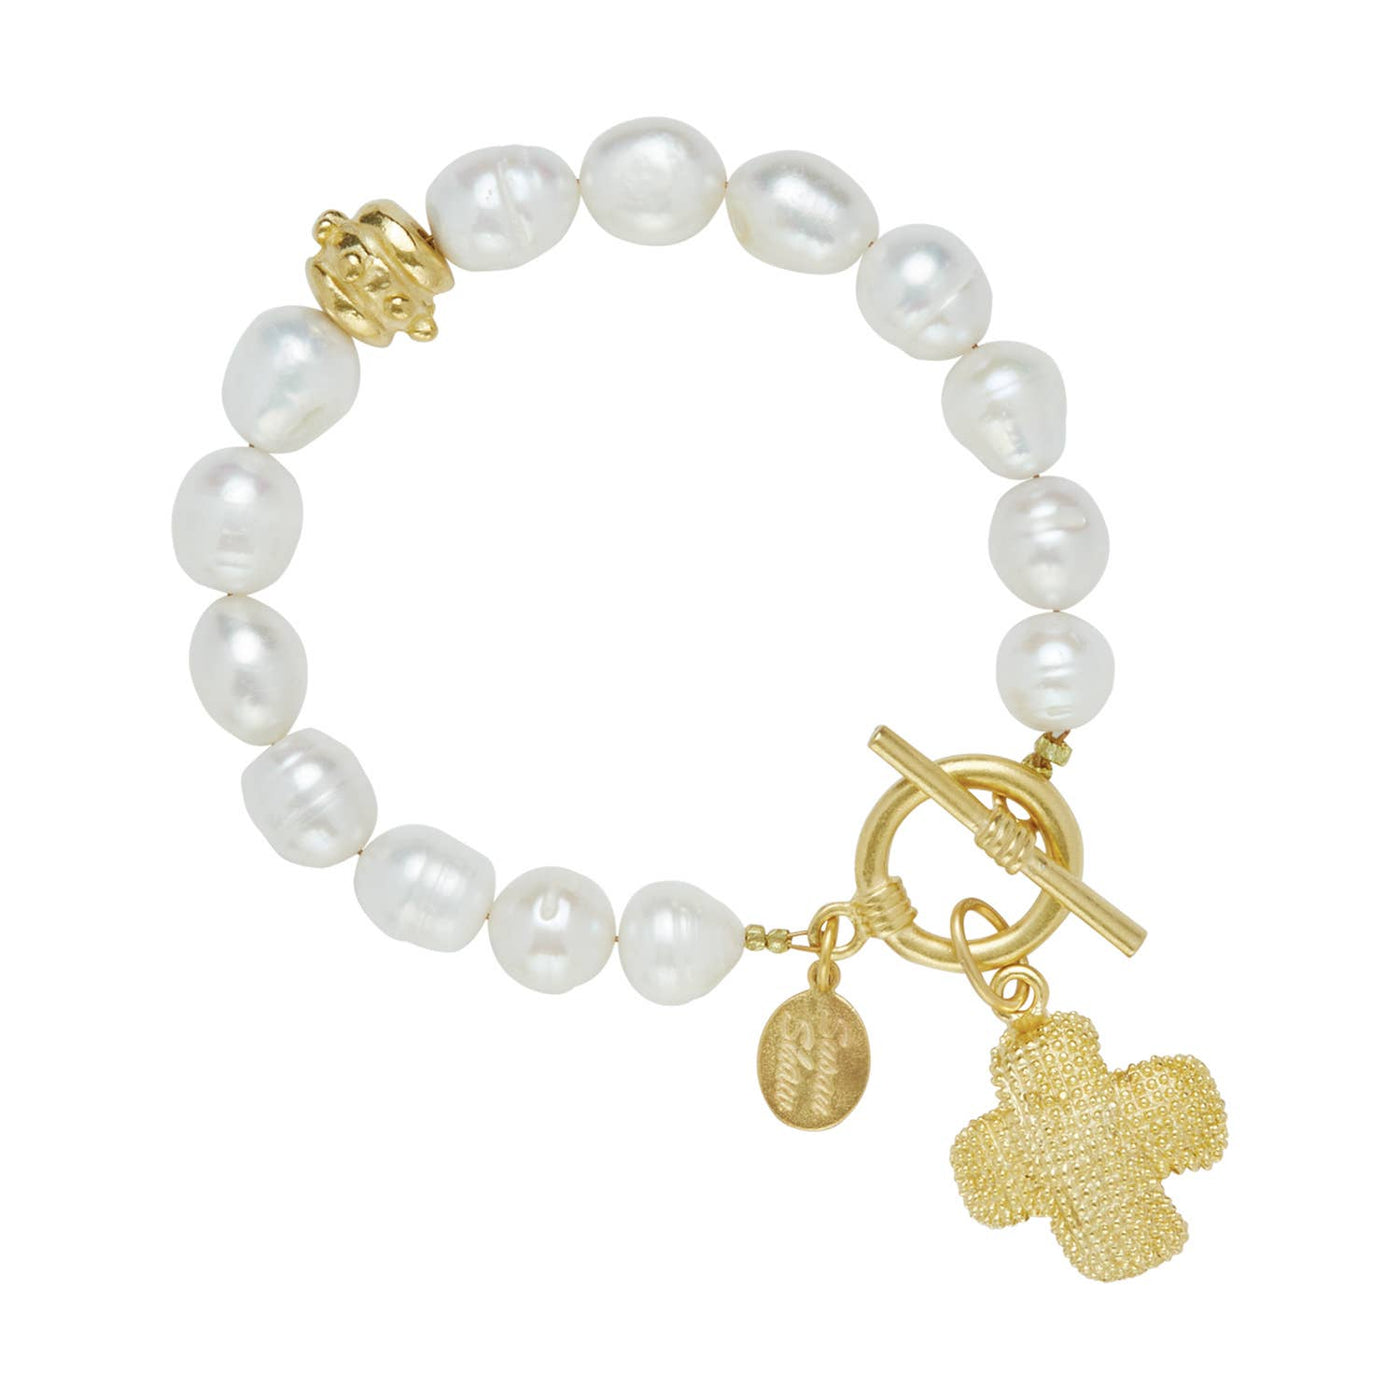 Susan Shaw - Gold Texas X's on Freshwater Pearl Bracelet